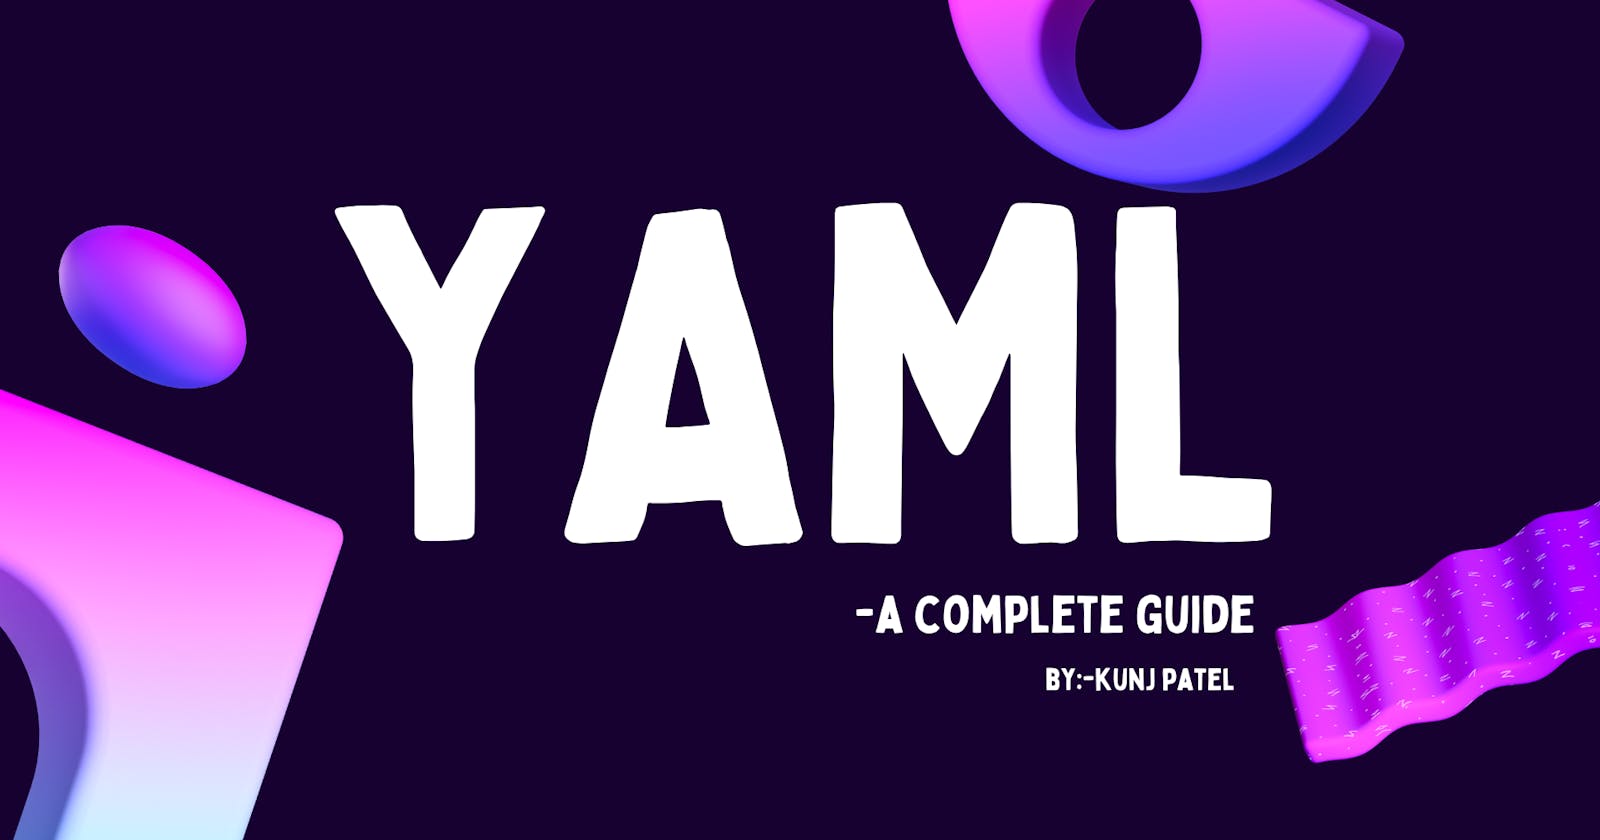 YAML  ain't Markup Language!!
-a complete guide